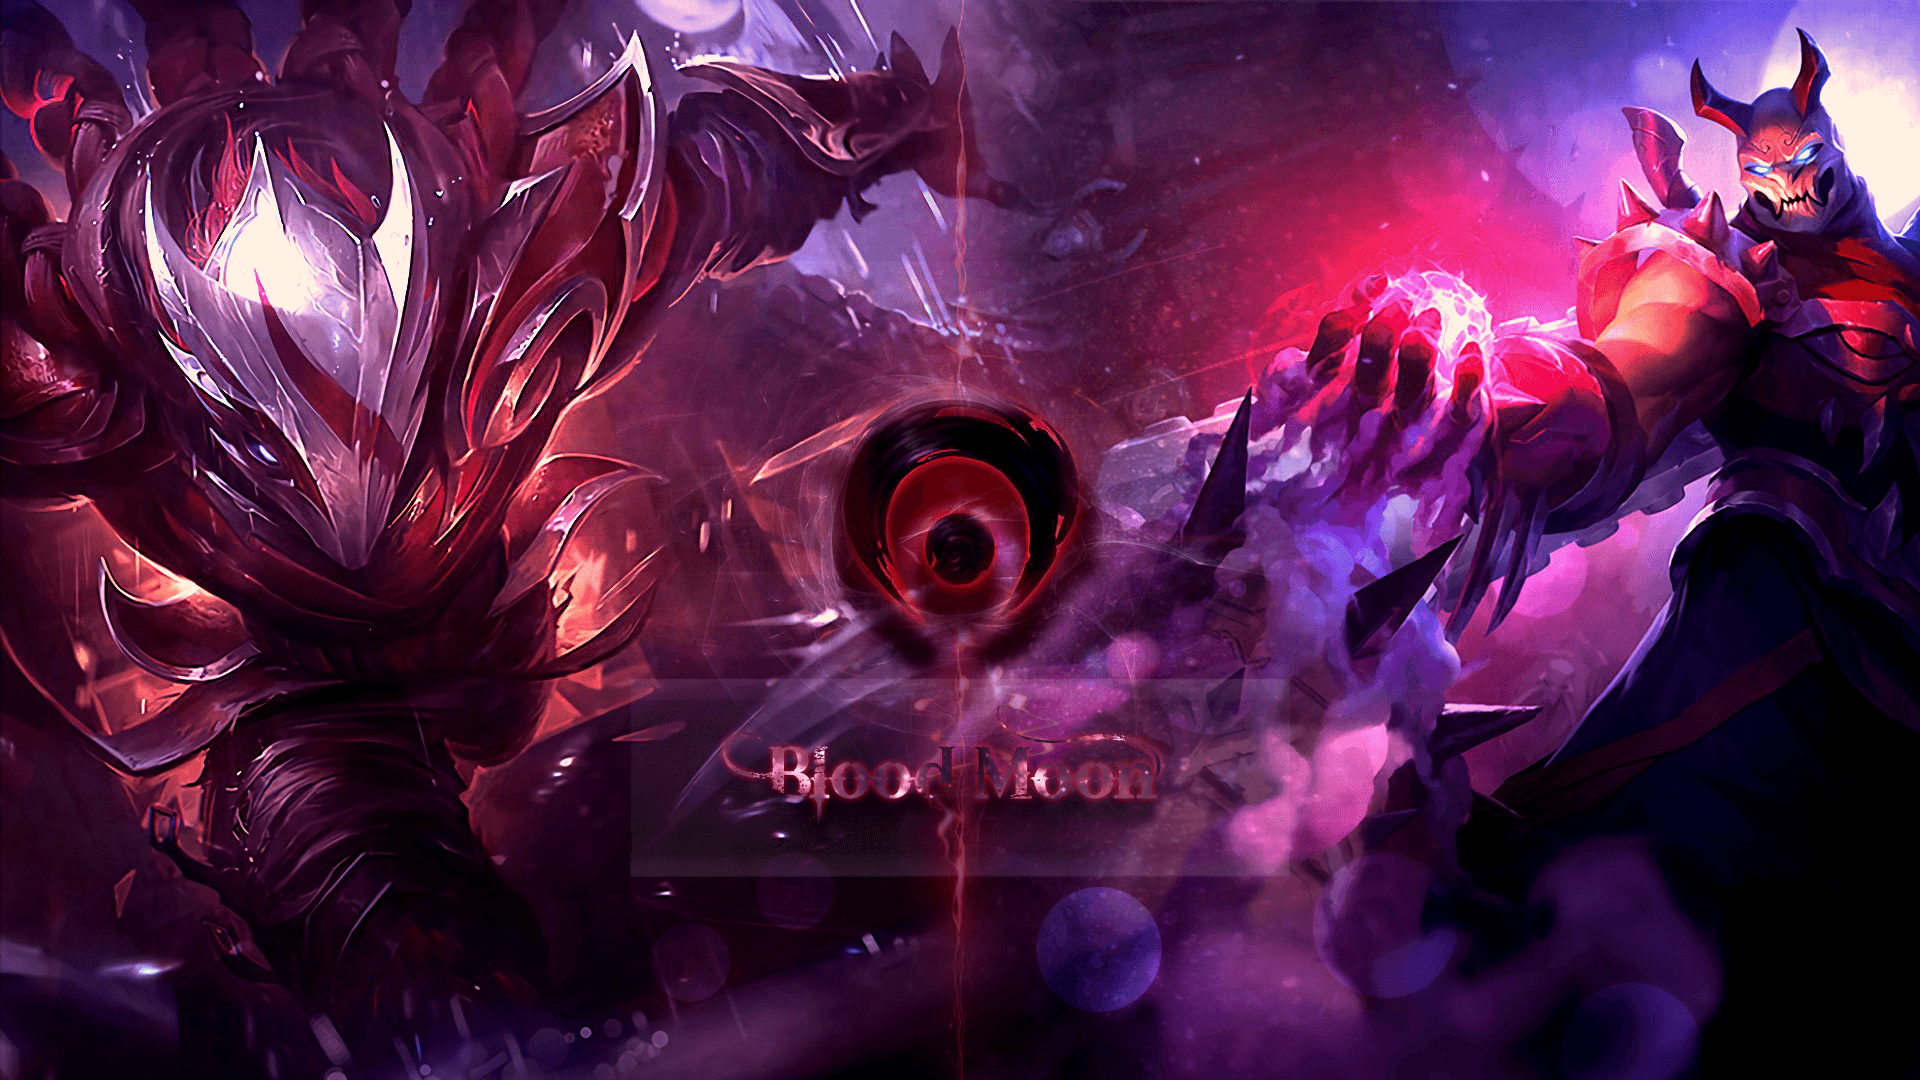 Another Talon wallpapers Talon and Shen blood moon. ;p : Talonmains